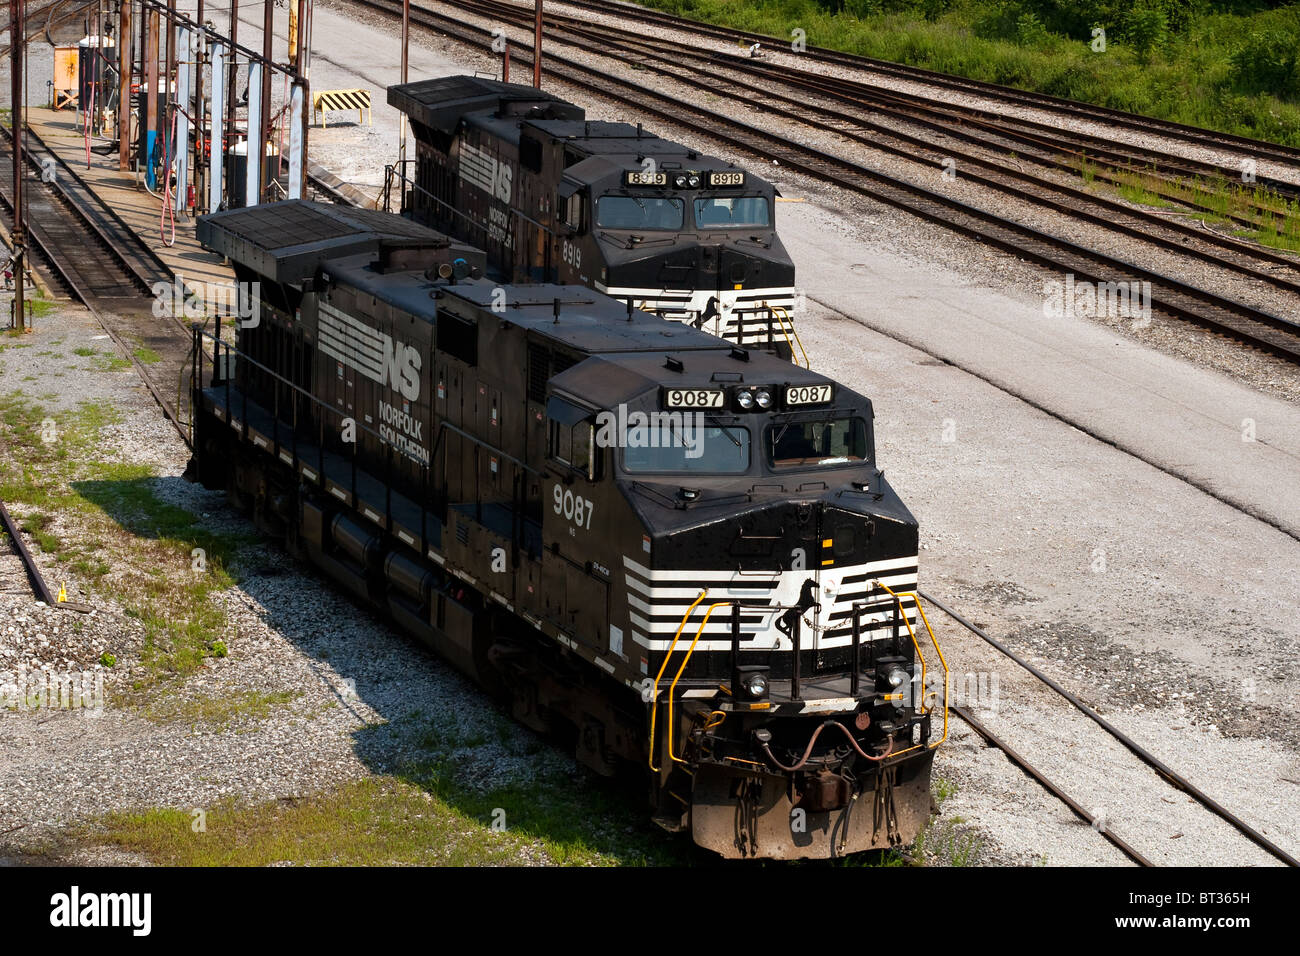 Two Norfolk Southern #9087 & #8919 GE D9-40CW locomotives (train engines) sit in the Dickinson, WV rail yard after refueling. Stock Photo